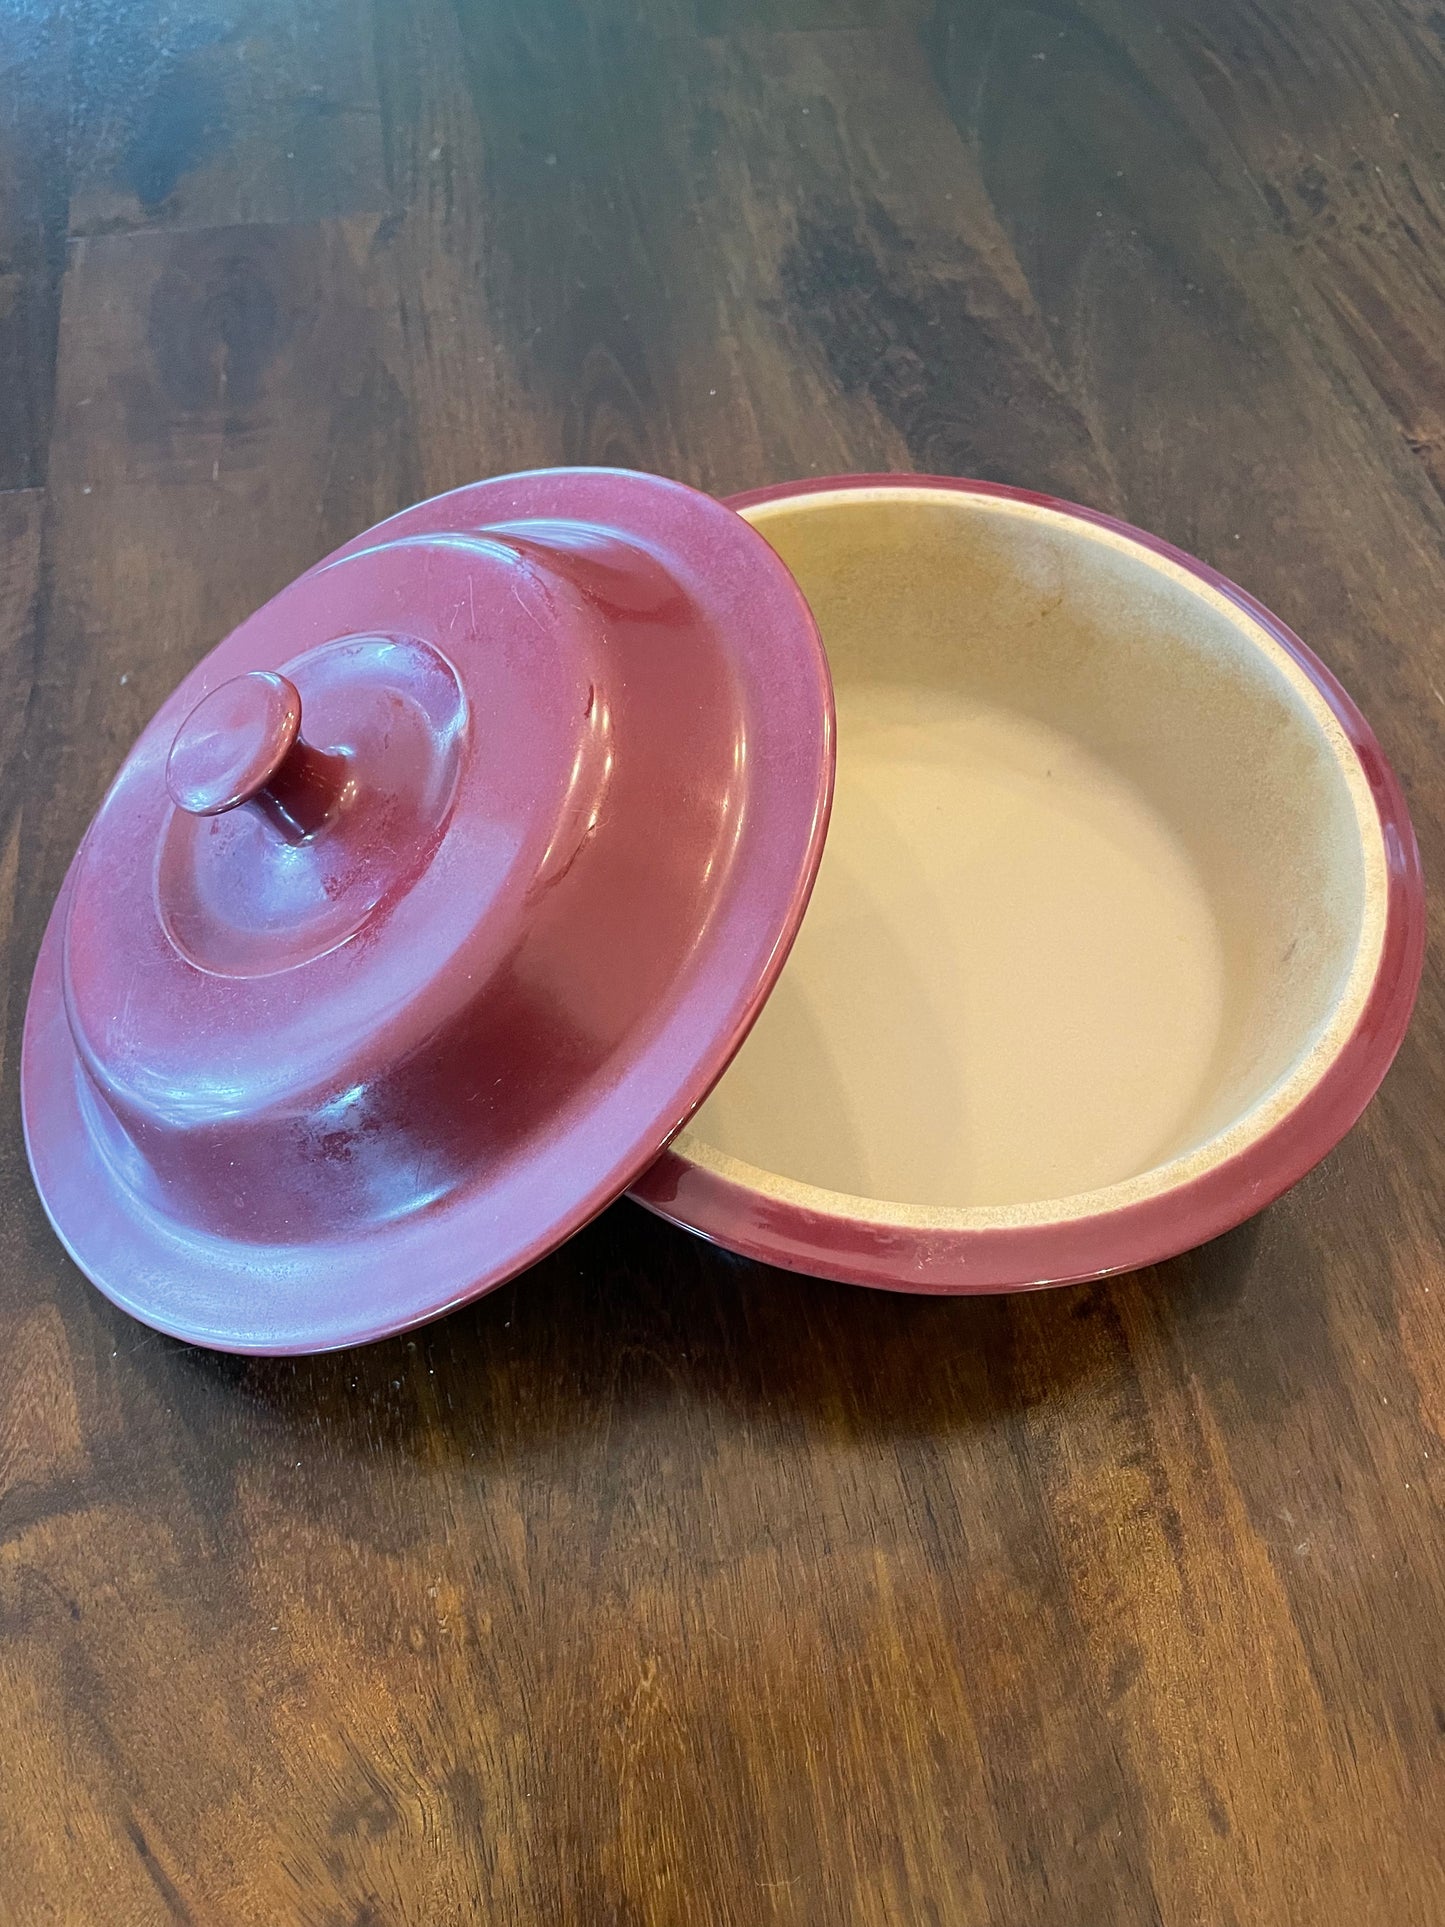 Pampered Chef 6C / 1.5L 9" Round Covered Casserole